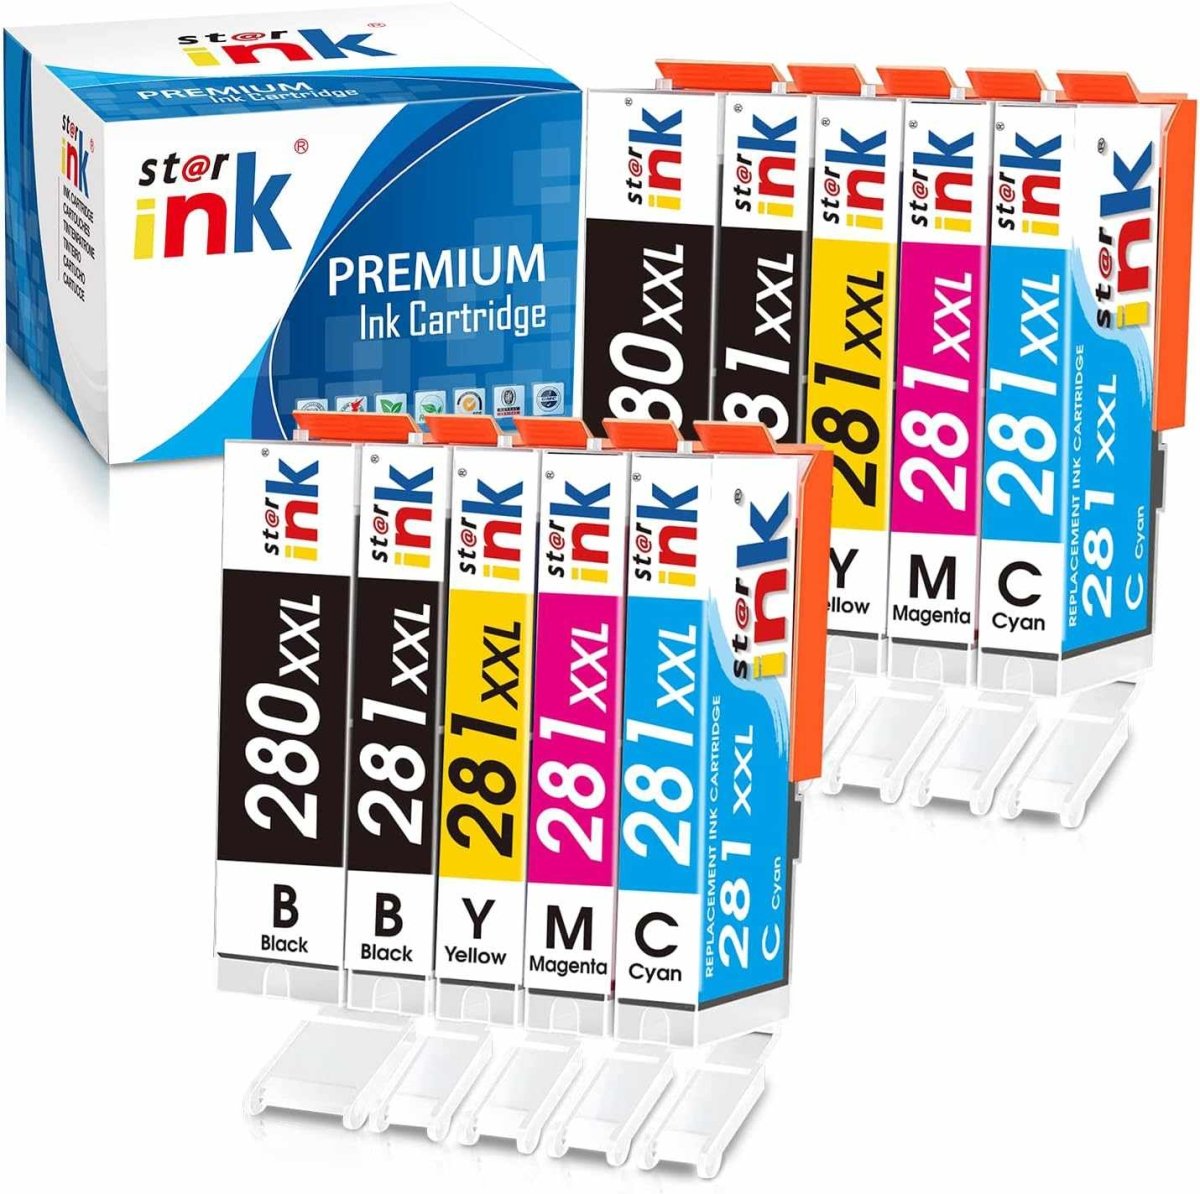 280 281 XXL Ink Cartridges Compatible Canon Printer 10-Pack - Linford Office:Printer Ink & Toner Cartridge